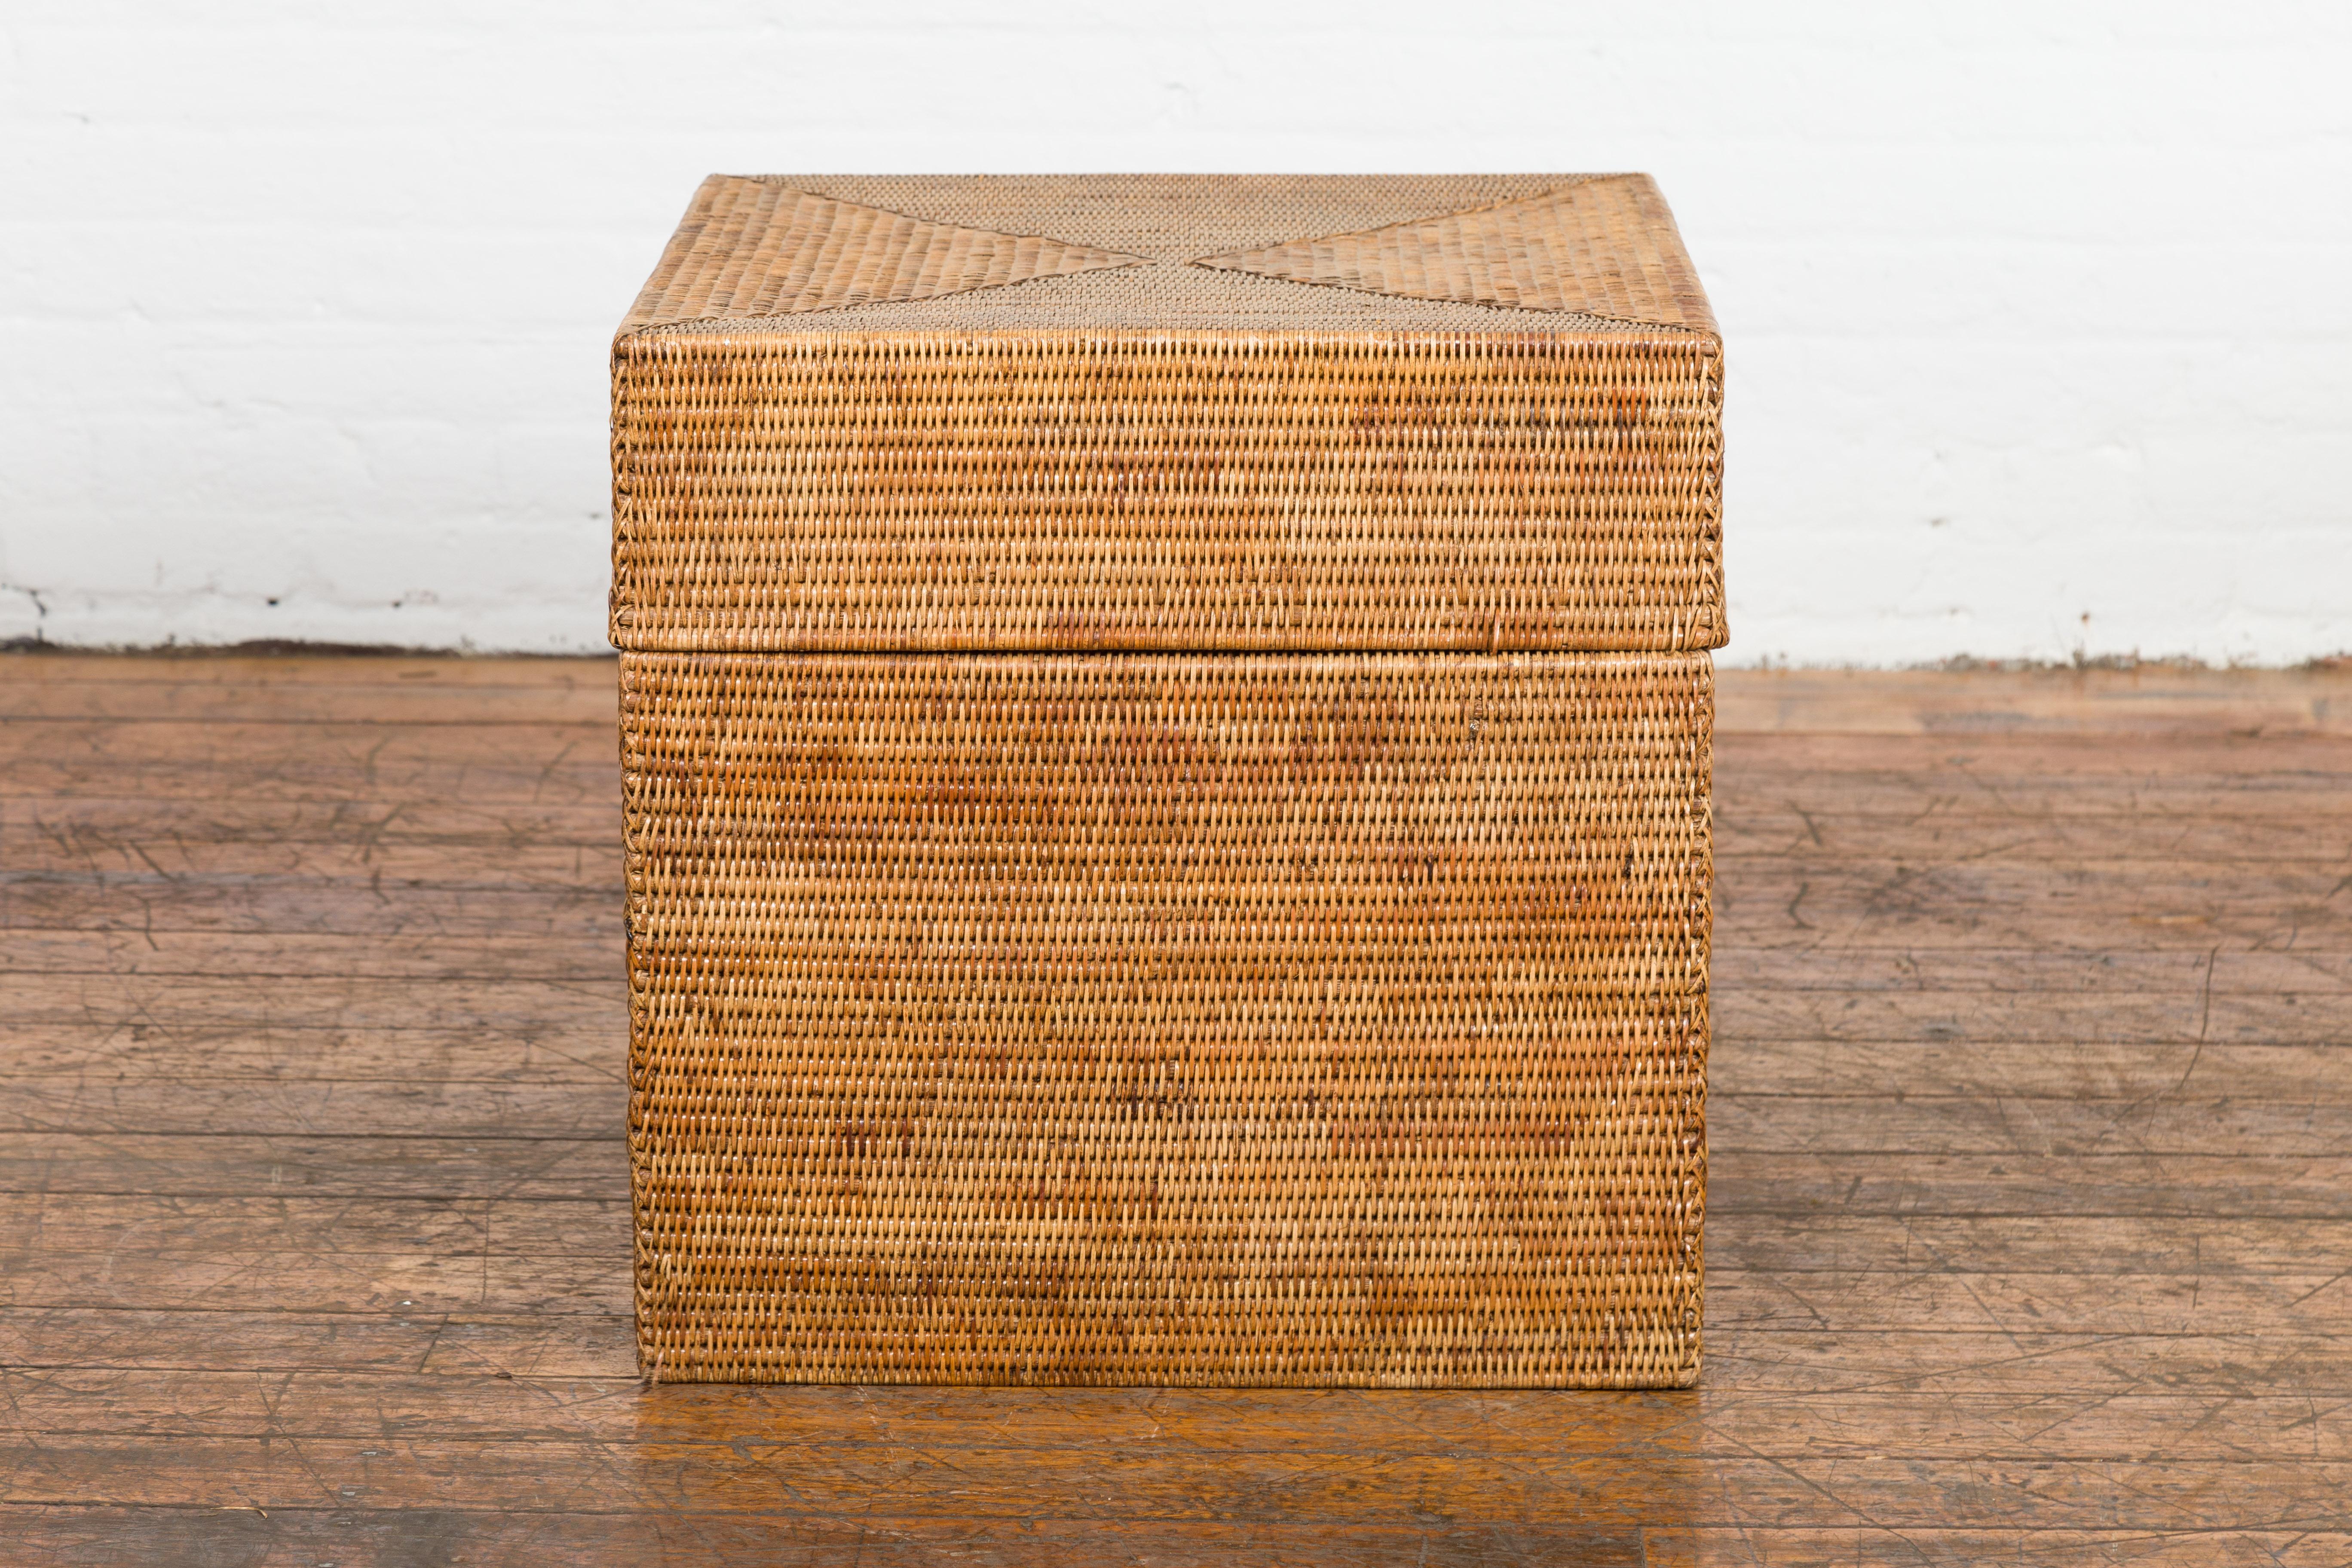 A rustic vintage Thai Country style woven rattan lidded box from the mid 20th century lidded, perfect to be used as a storage or toy box. Embrace a rustic aesthetic with this vintage Thai Country-style woven rattan lidded box from the mid-20th